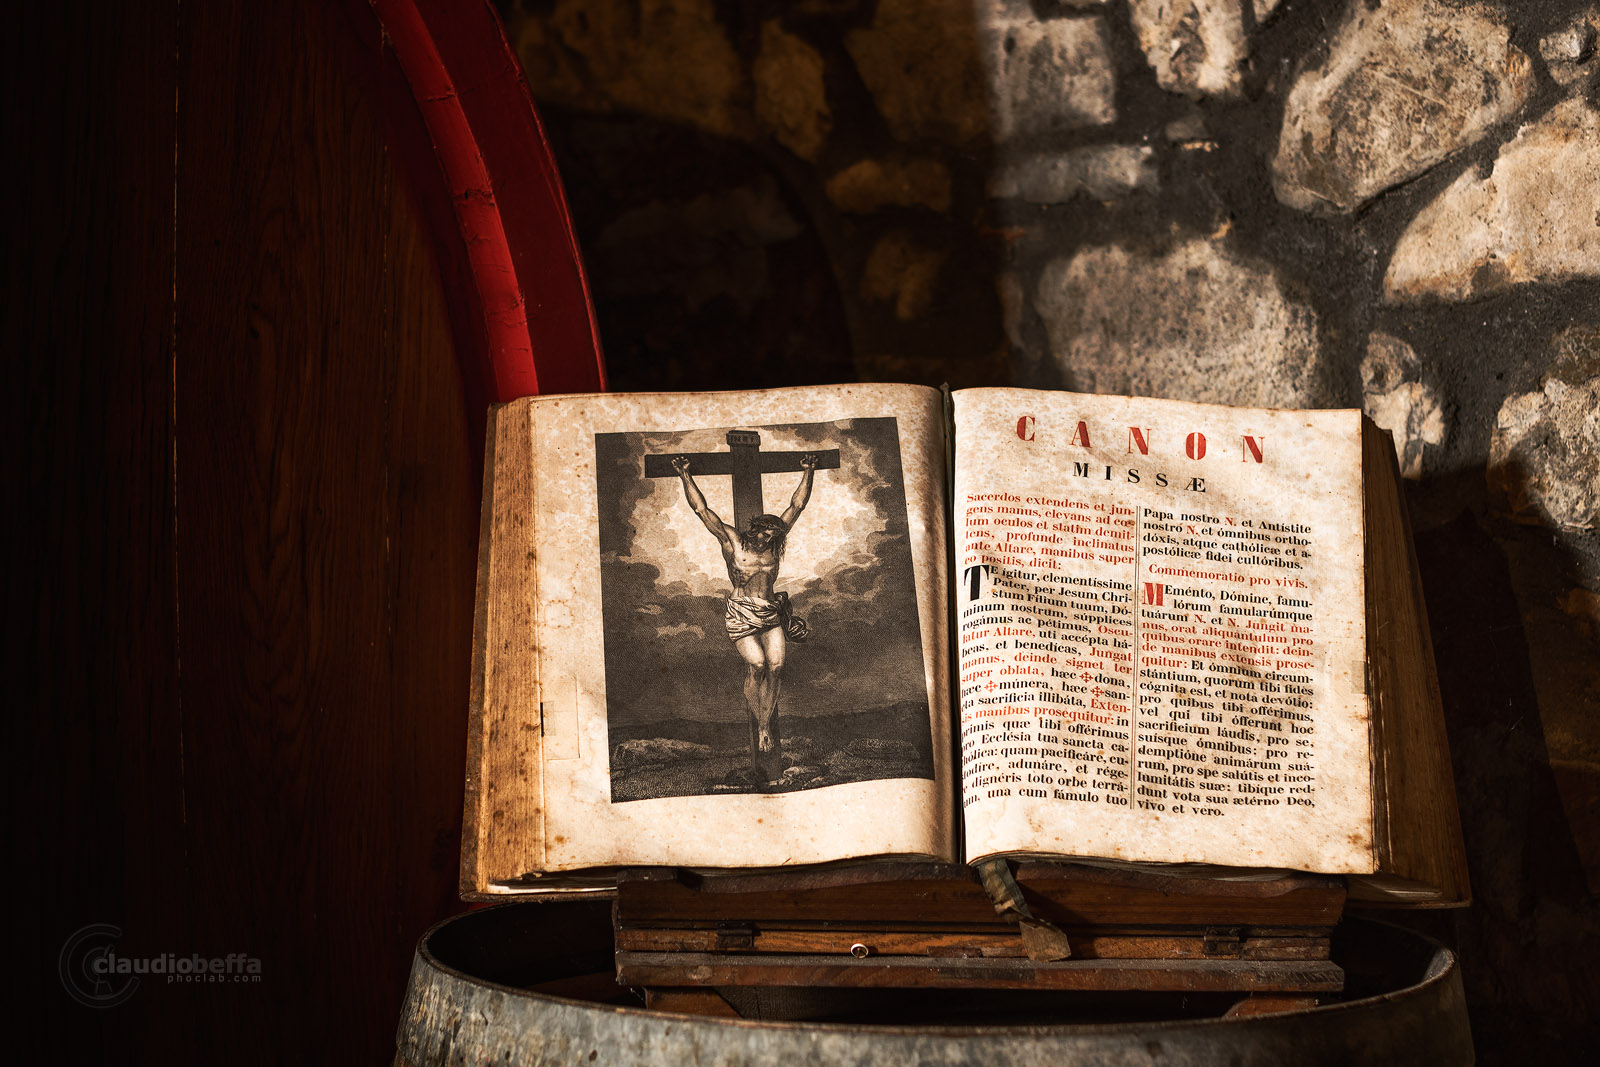 Cellar, Canon Missae, Missal, Book, Christ, Cask, Ancient, Wine, Wine-making, Costanti, Light, Wood, Bricks, Tuscany, Toscana, Val d'Orcia, Montalcino, Italy, Italia, Ancient wine cellars of Tuscany